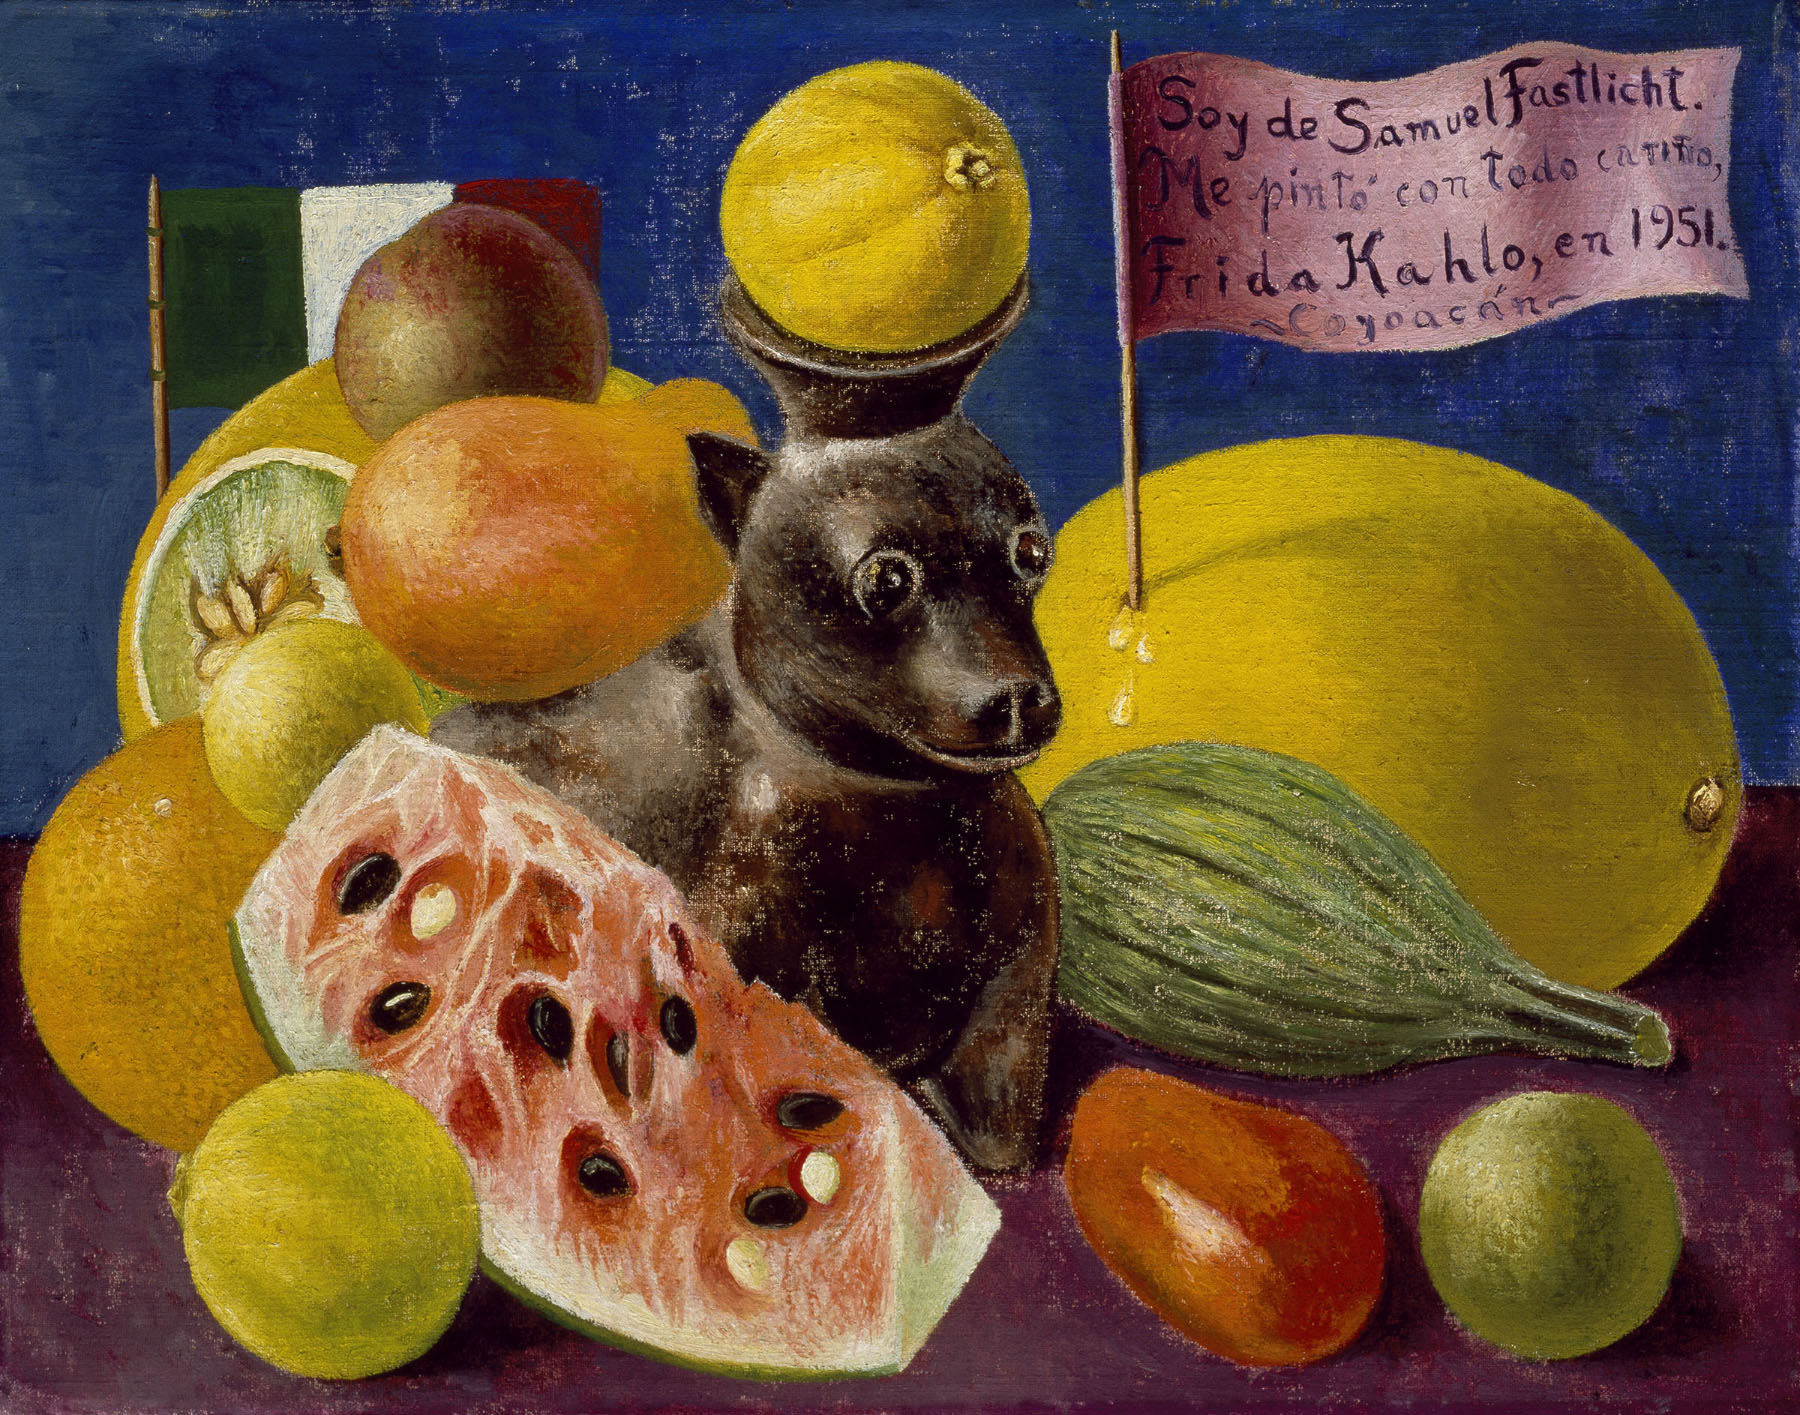 Frida Kahlo's "Still Life (detail), 1951," is an oil on masonite painting with fruit and a figurine of a black dog in the middle, with a flag sticking out of what looks like a yellow melon. Private Collection, Courtesy Galería Arvil. © 2021 Banco de México Diego Rivera Frida Kahlo Museums Trust, Mexico, D.F. / Artists Rights Society (ARS), New York 